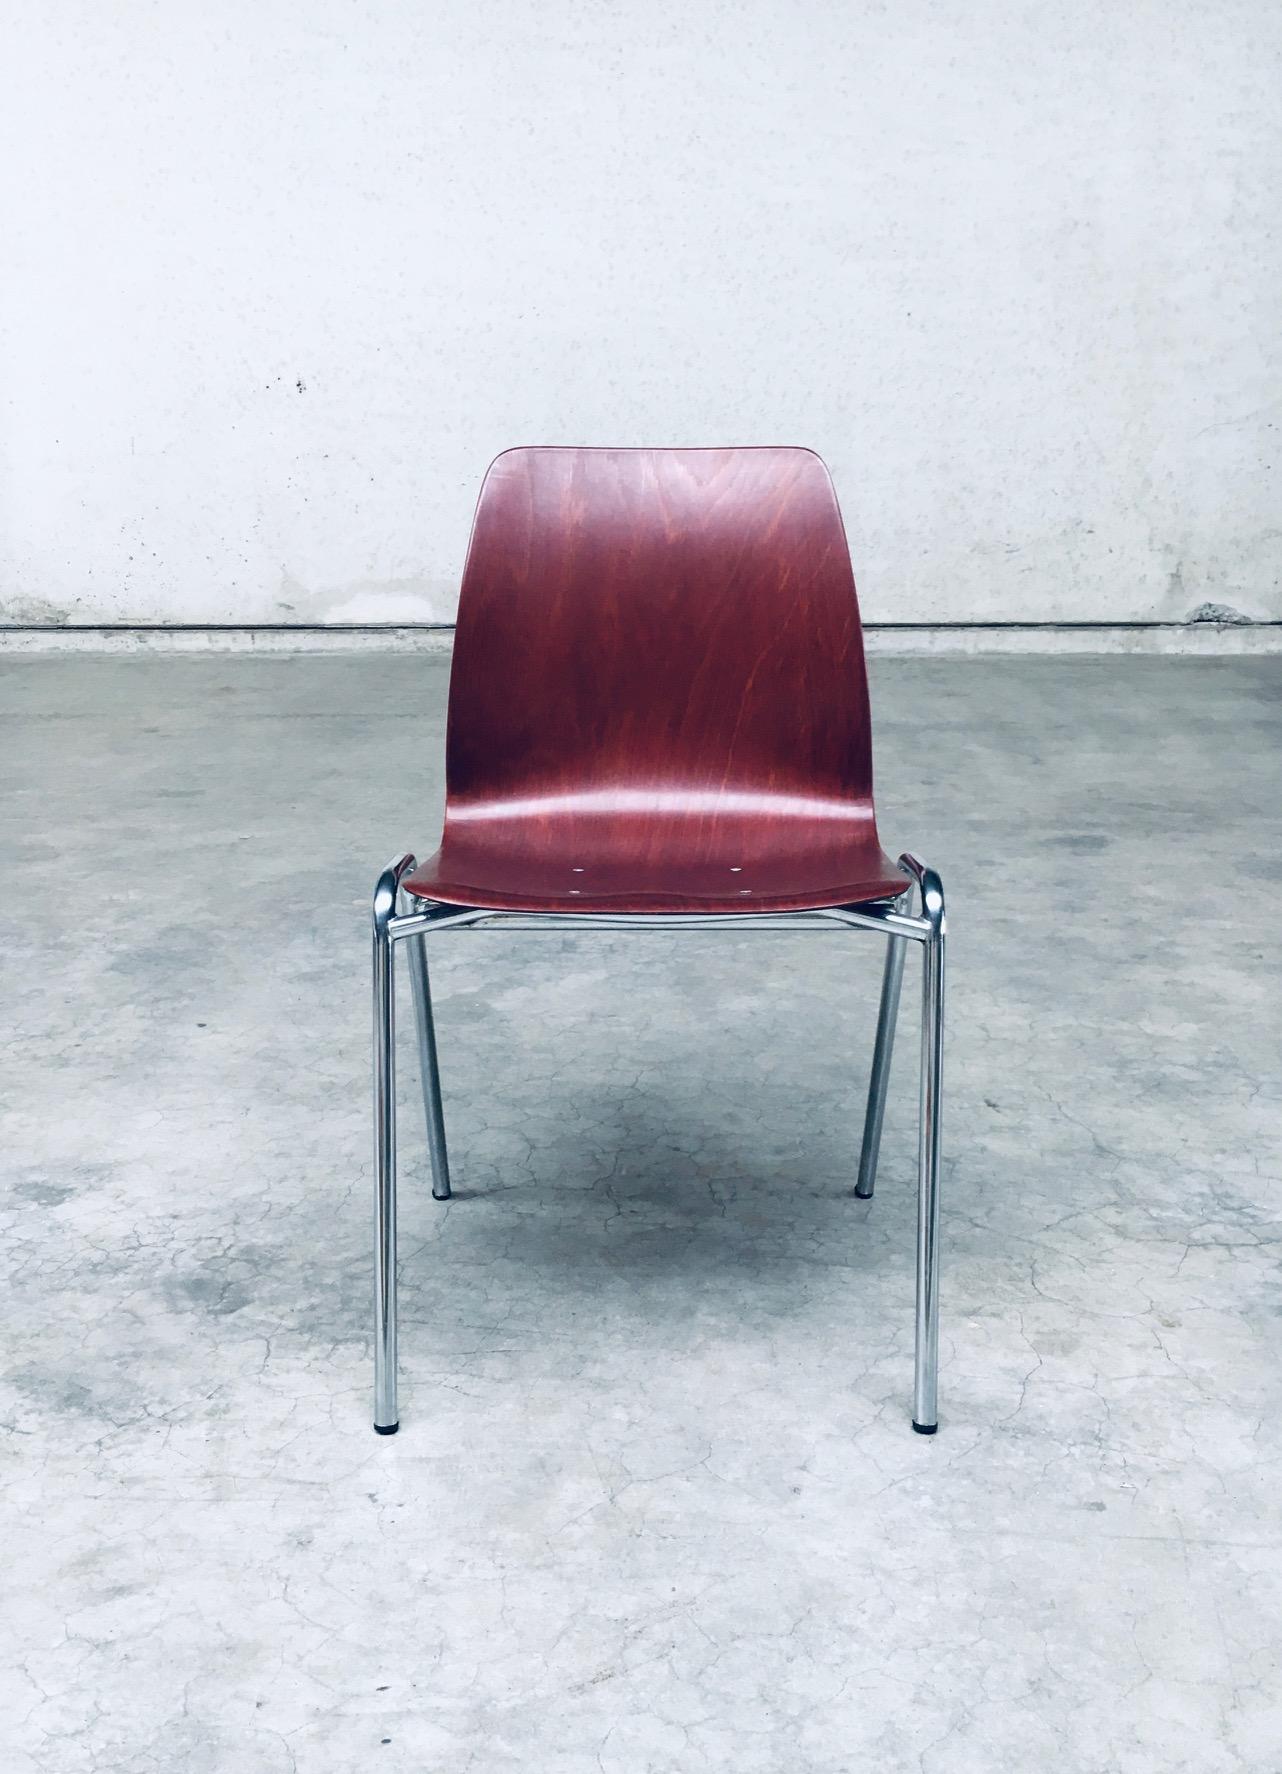 Midcentury Design Stacking Chairs by Elmar Flötotto for Pagholz, 1960's Germany For Sale 1